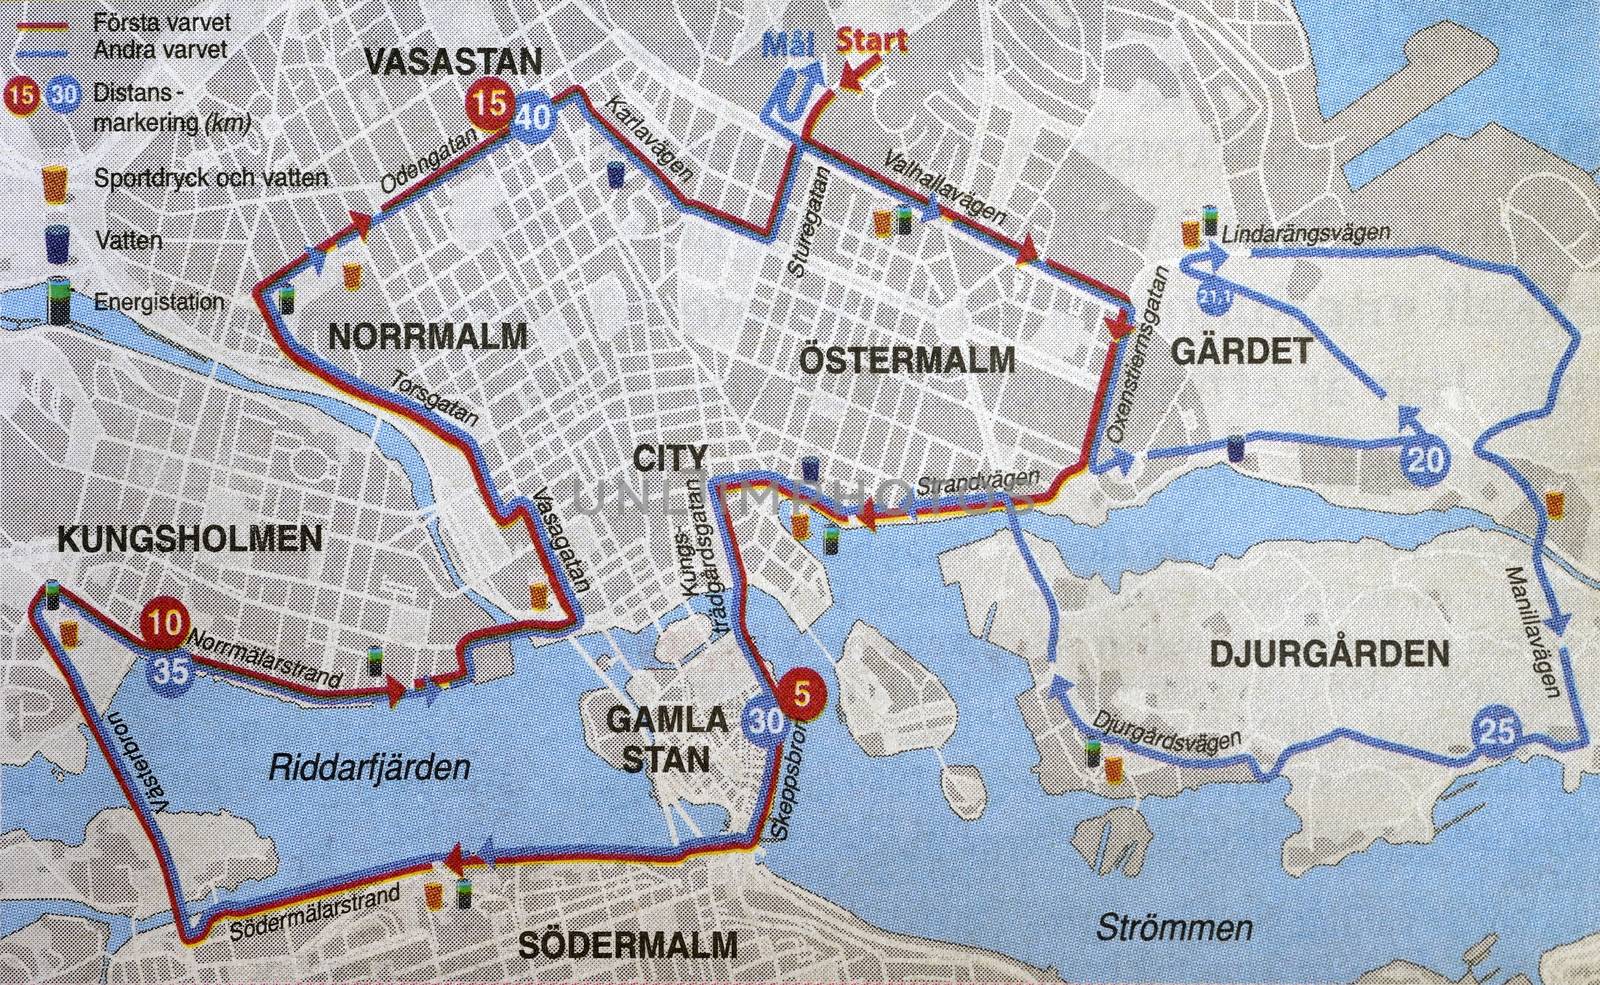 Map over Stockholm Marathon 2015. The race is divided in two turns, first lap in red and second in blue







Stockholm Marathon 2015 Map.